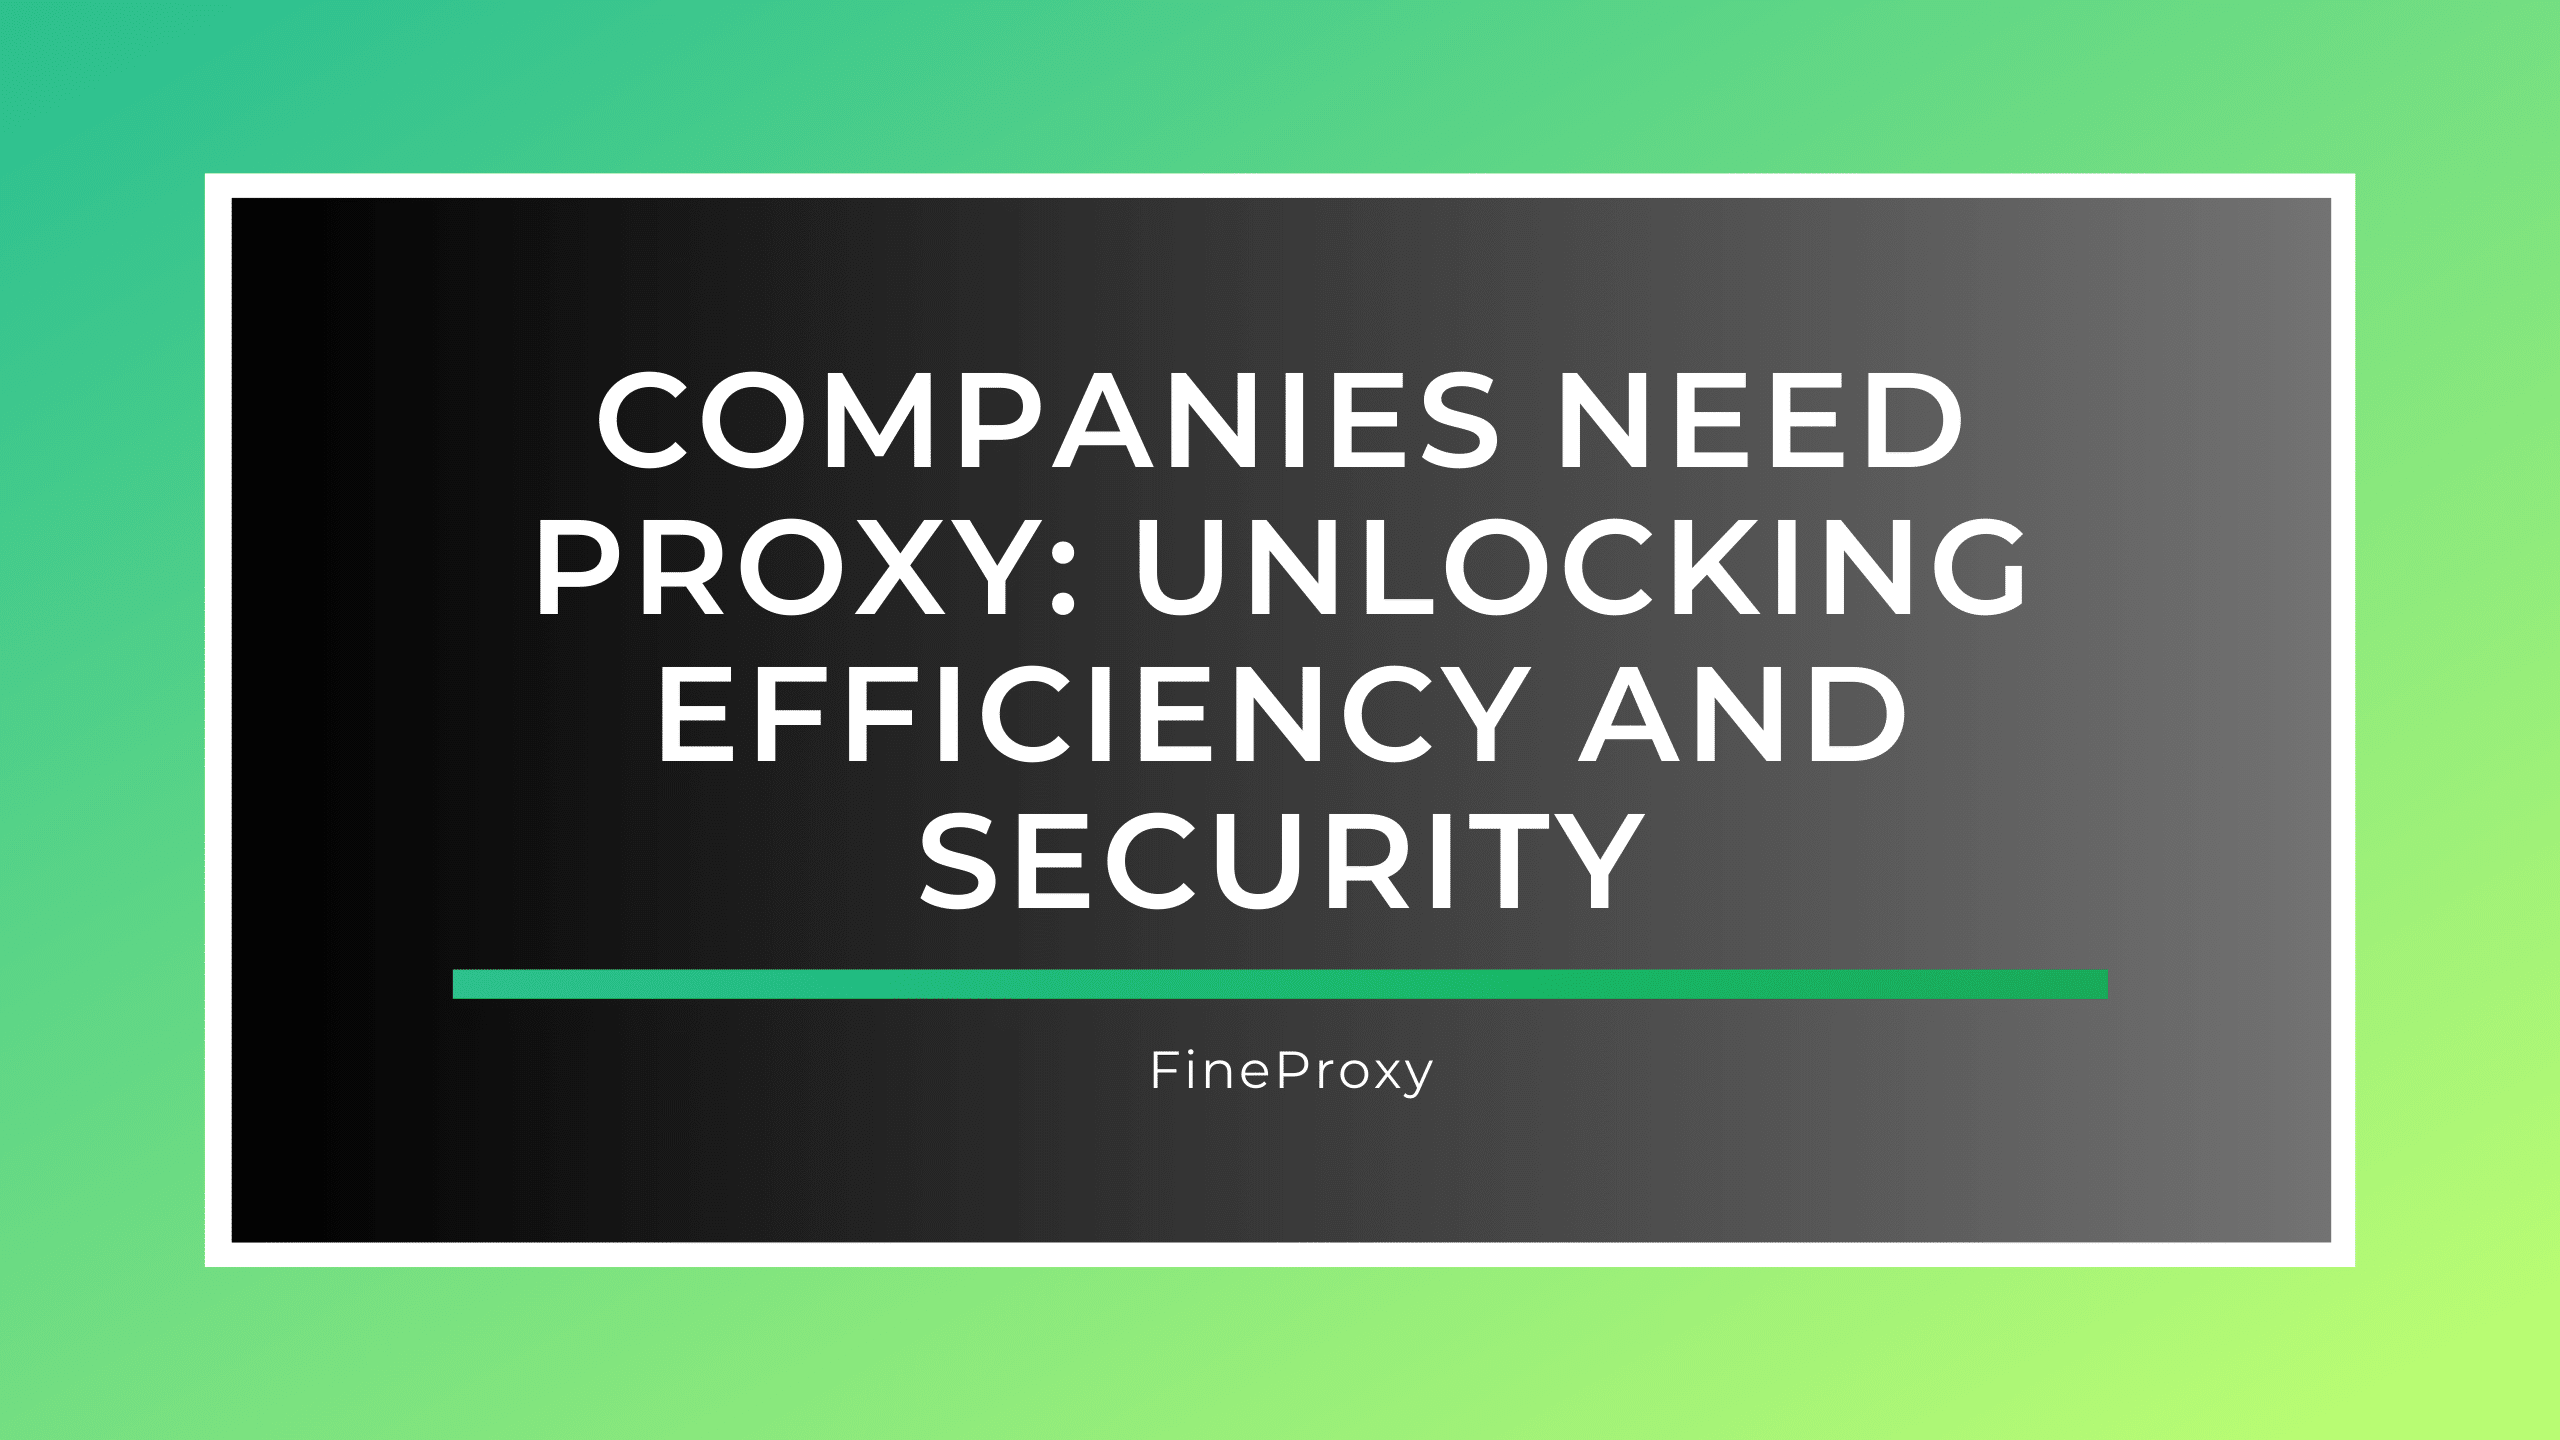 Companies Need Proxy: Unlocking Efficiency and Security